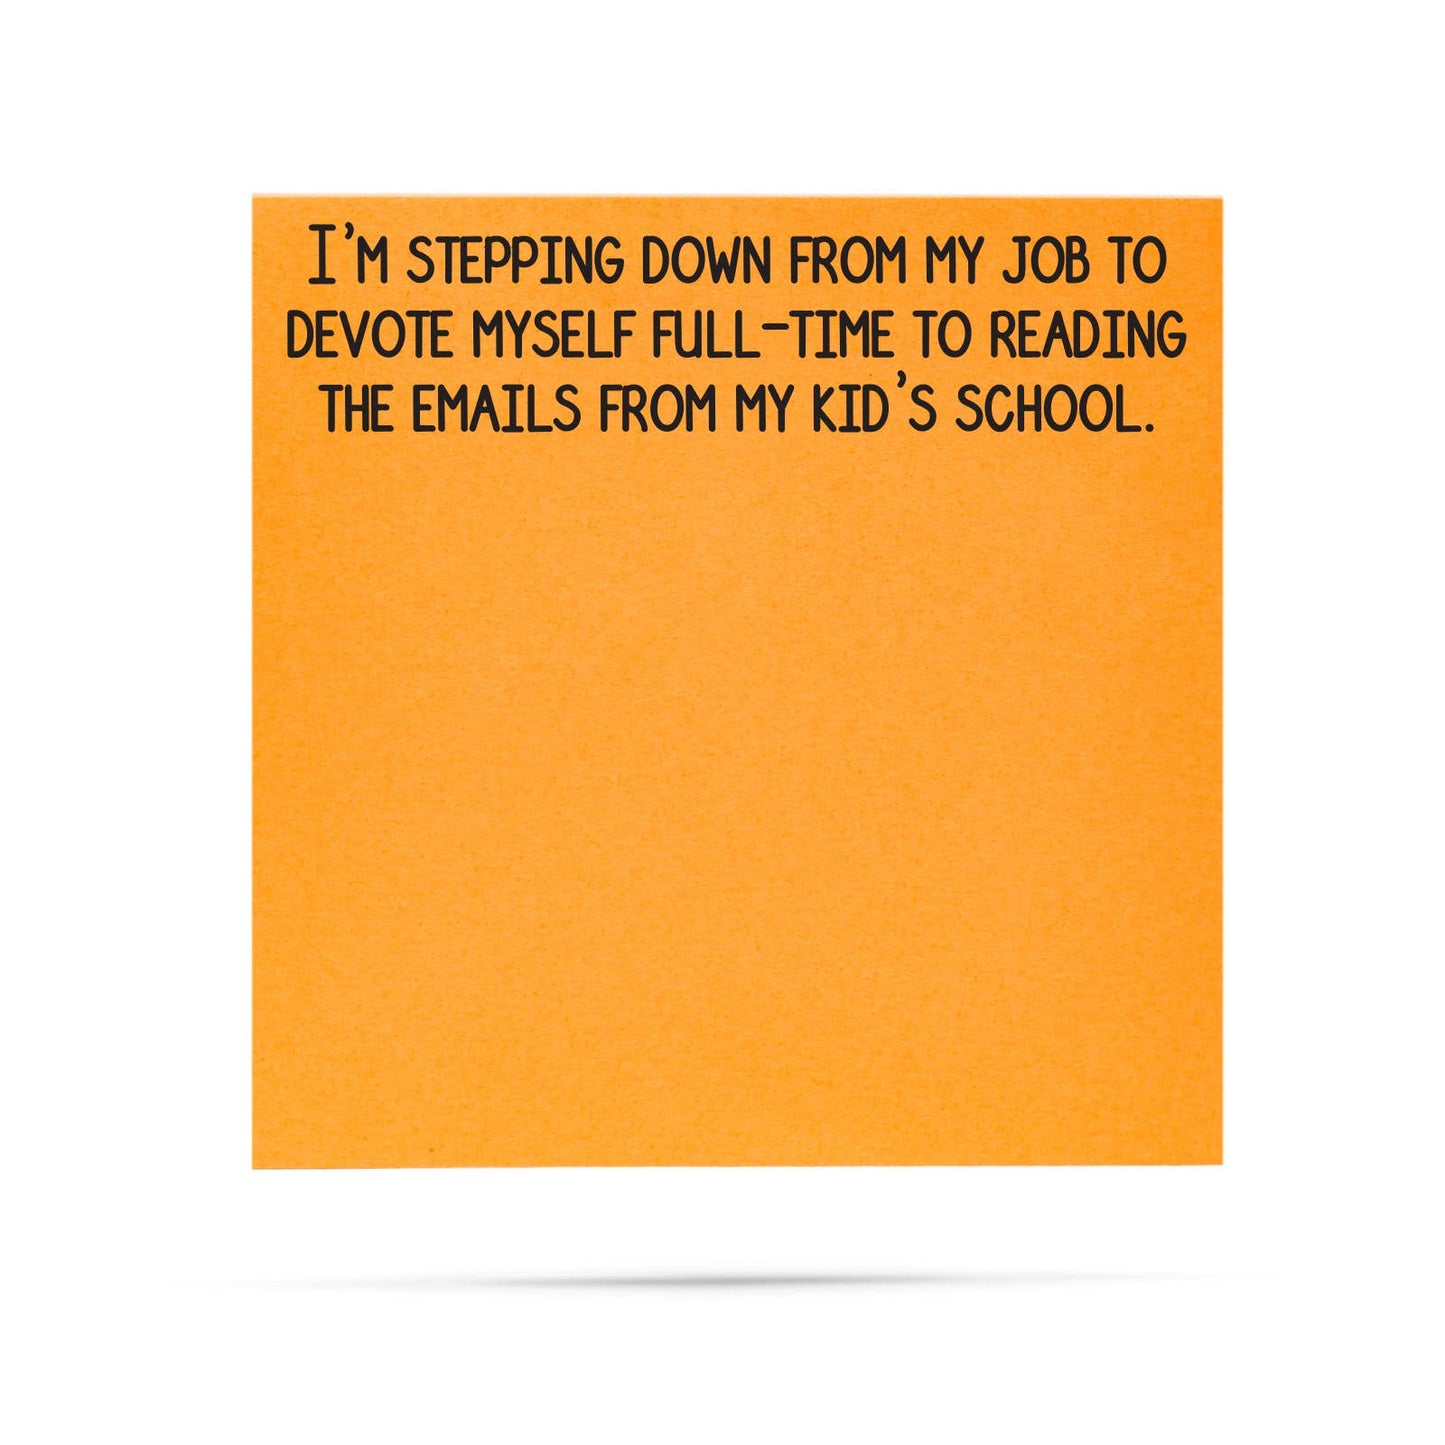 Emails from my kids school | funny sticky notes with sayings